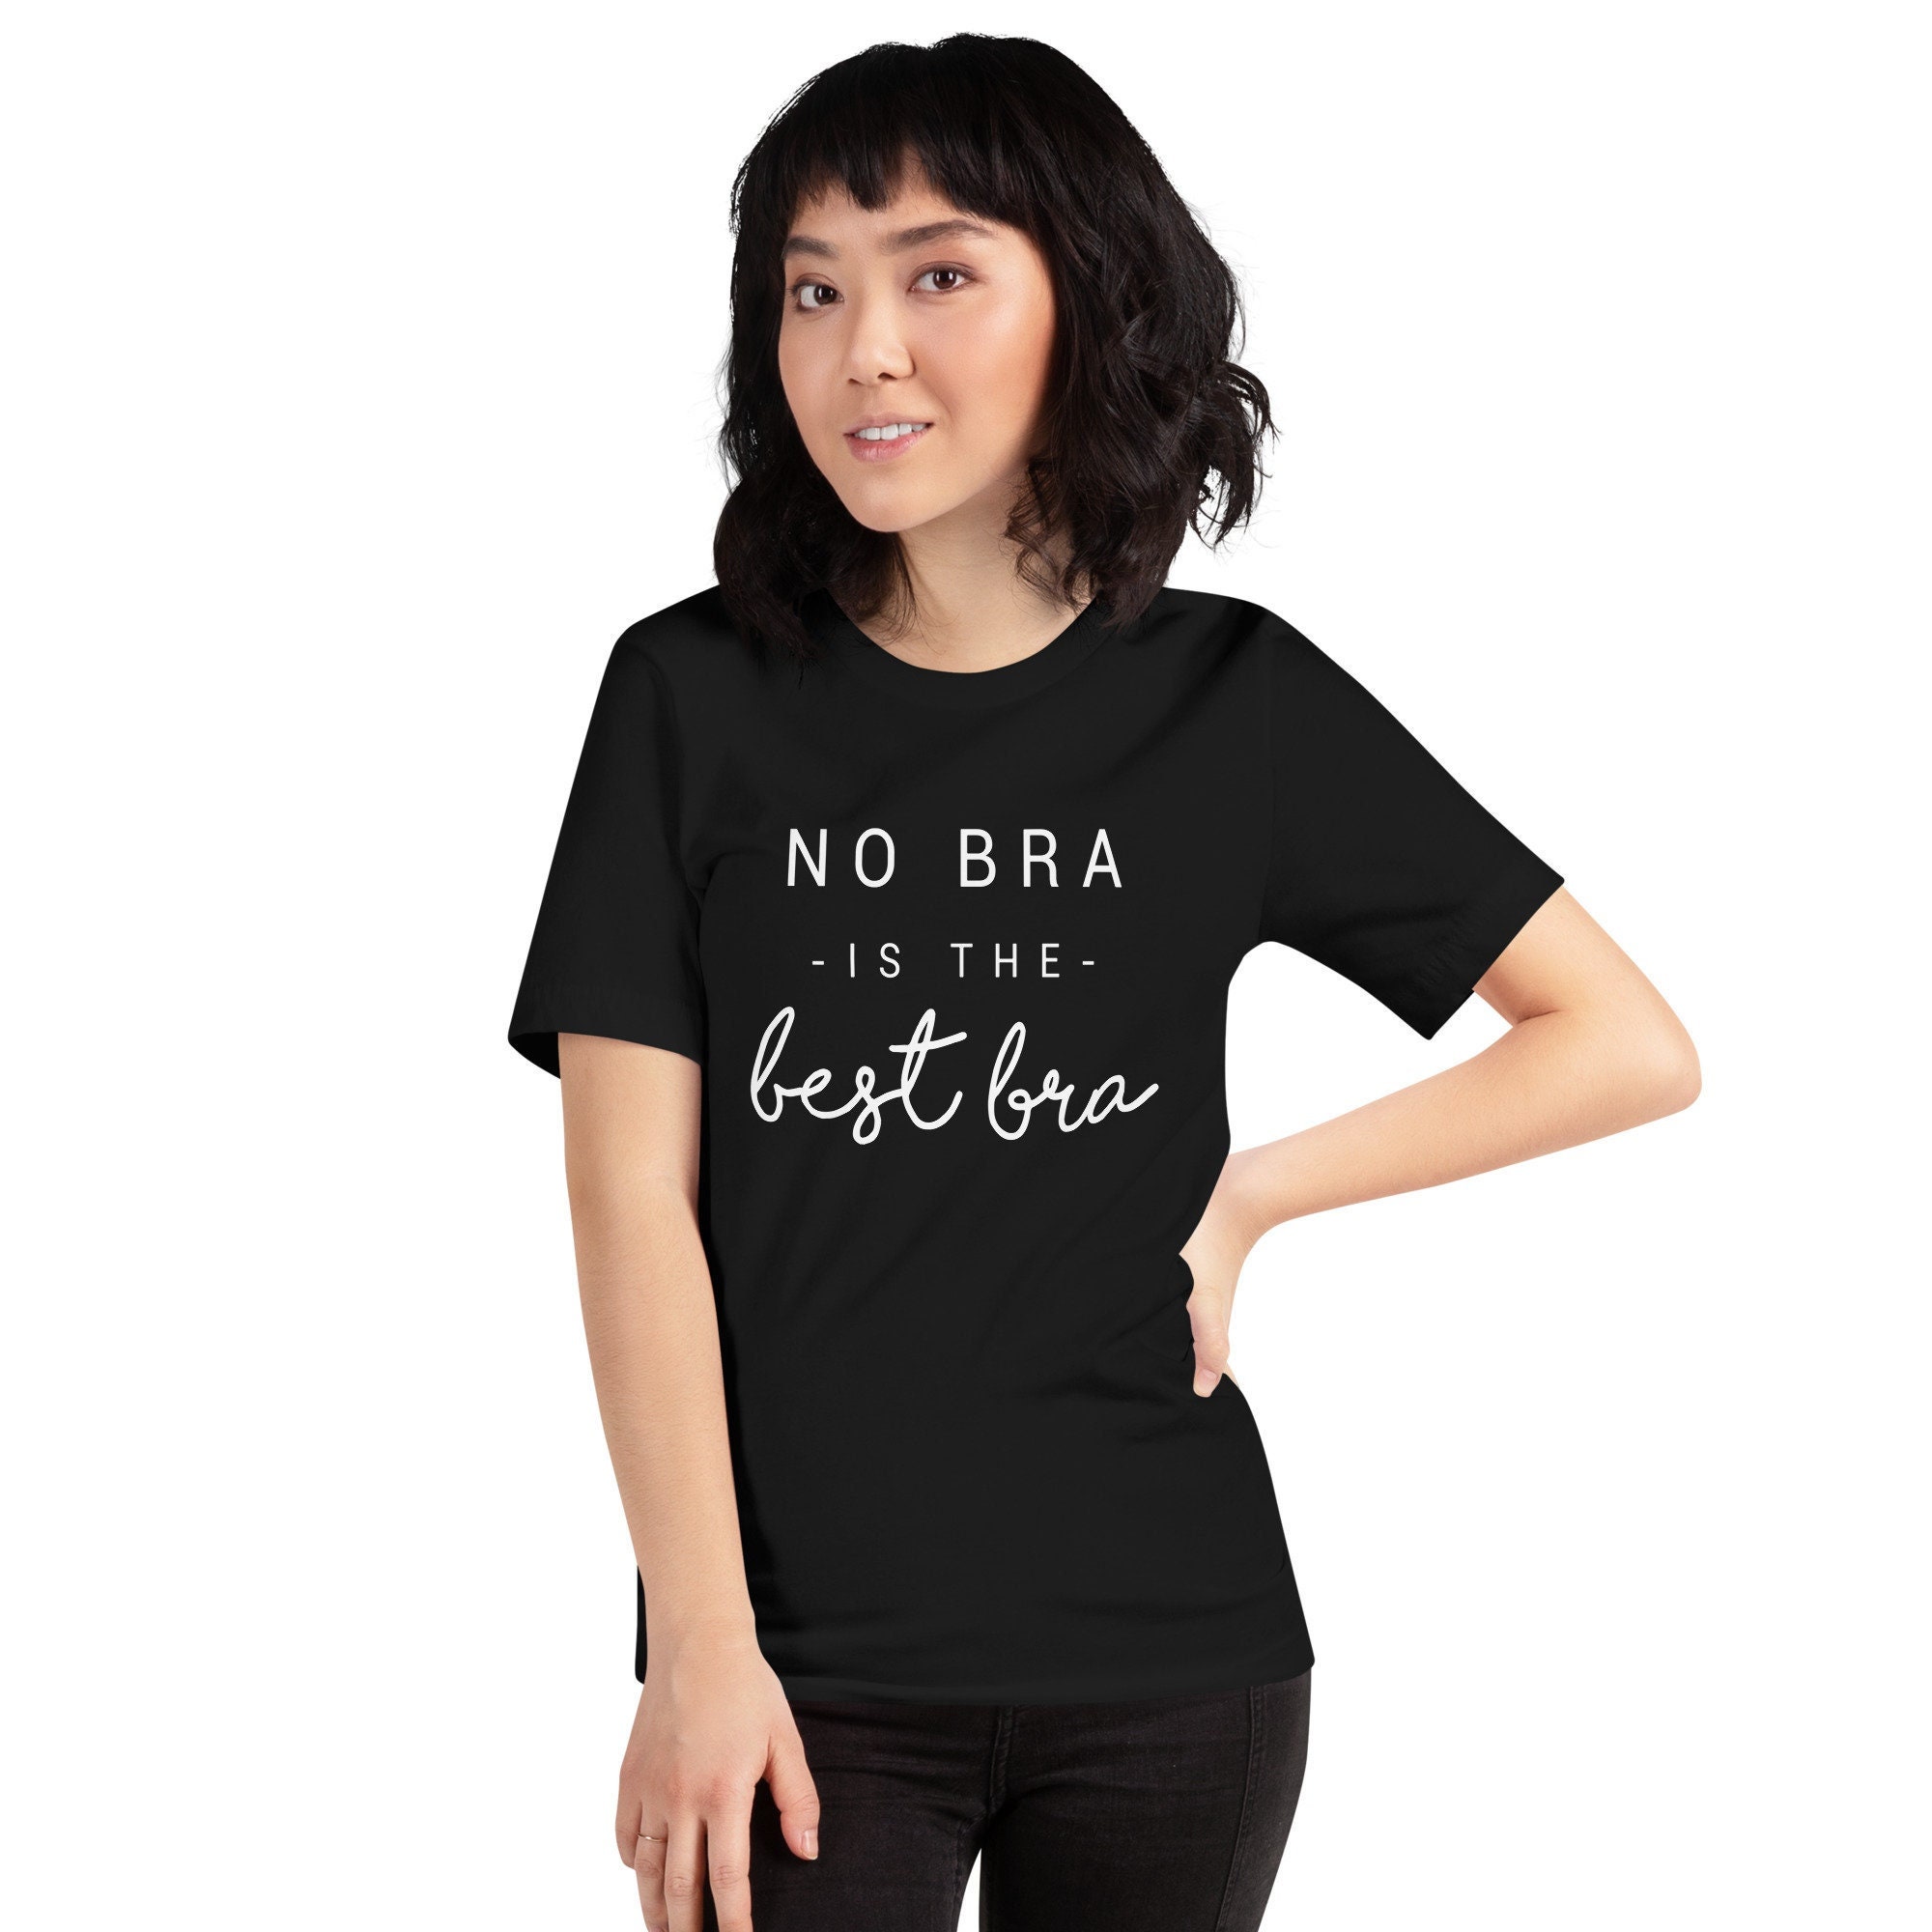 No Bra T-shirts Funny T Shirts for Women Instagram Shirts for Teens With  Sayings Graphic Tee Womens Tshirts -  Canada